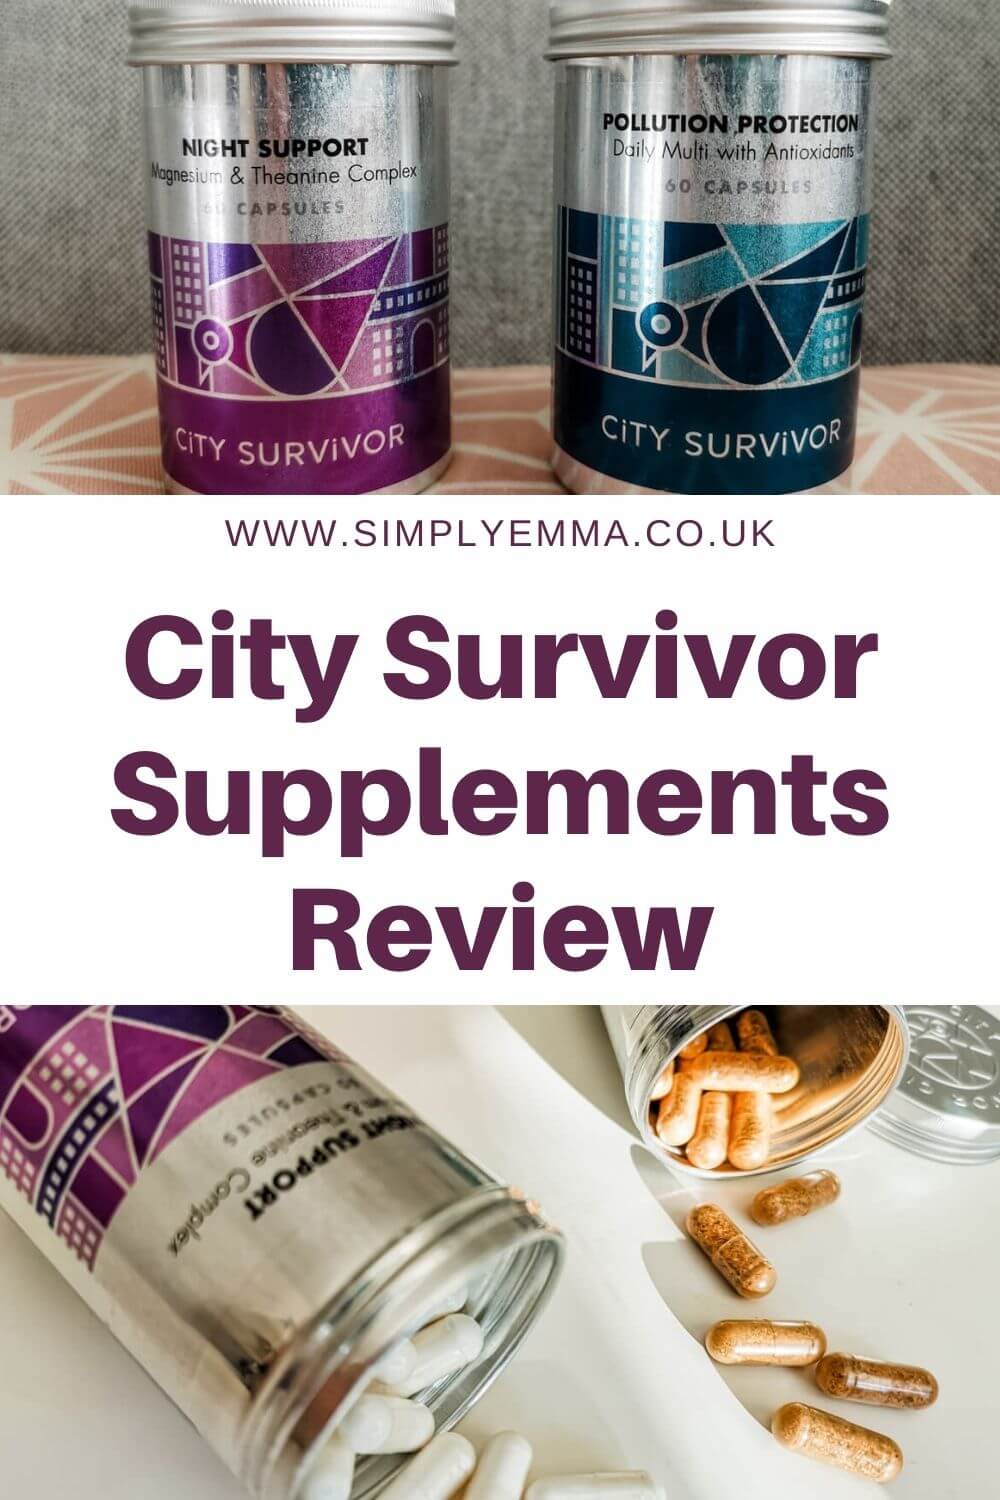 Pinterest image showing two photos of the City Survivor supplements in metal tins. With text in the centre of the image "www.simplyemma.co.uk. City Survivor Supplements Review"